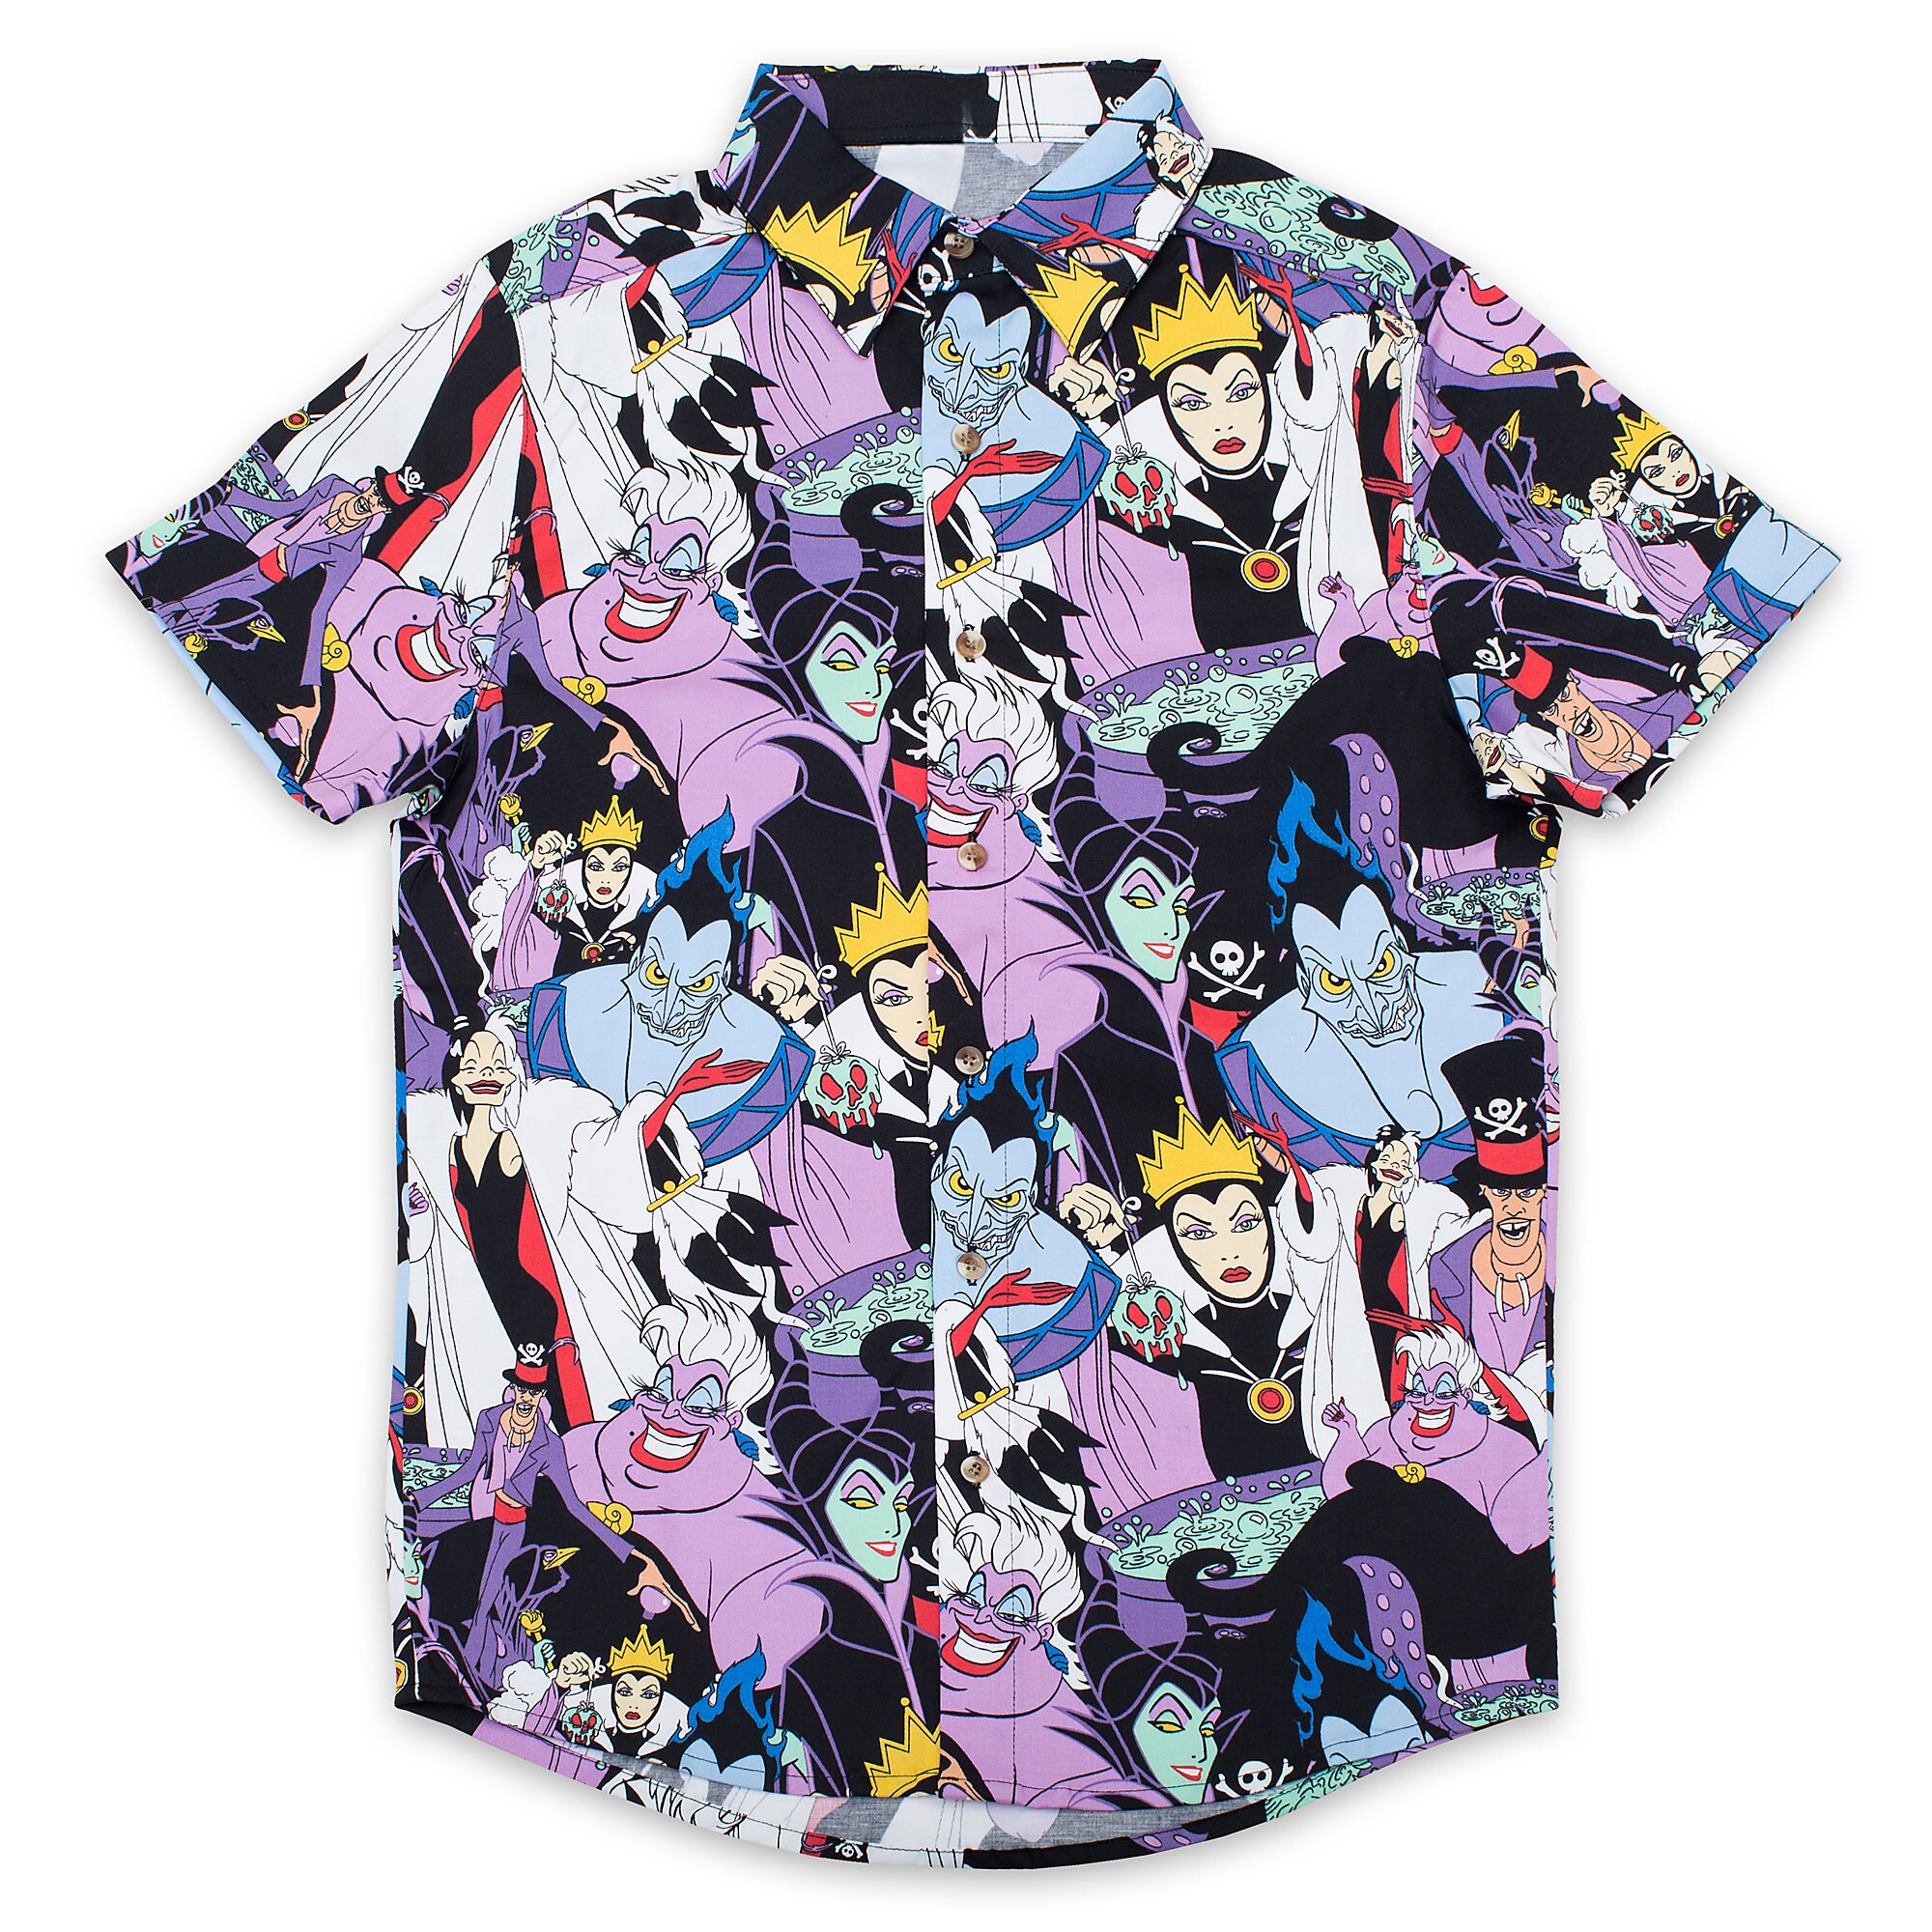 Disney Villains ButtonUp Shirt for Adults by Cakeworthy